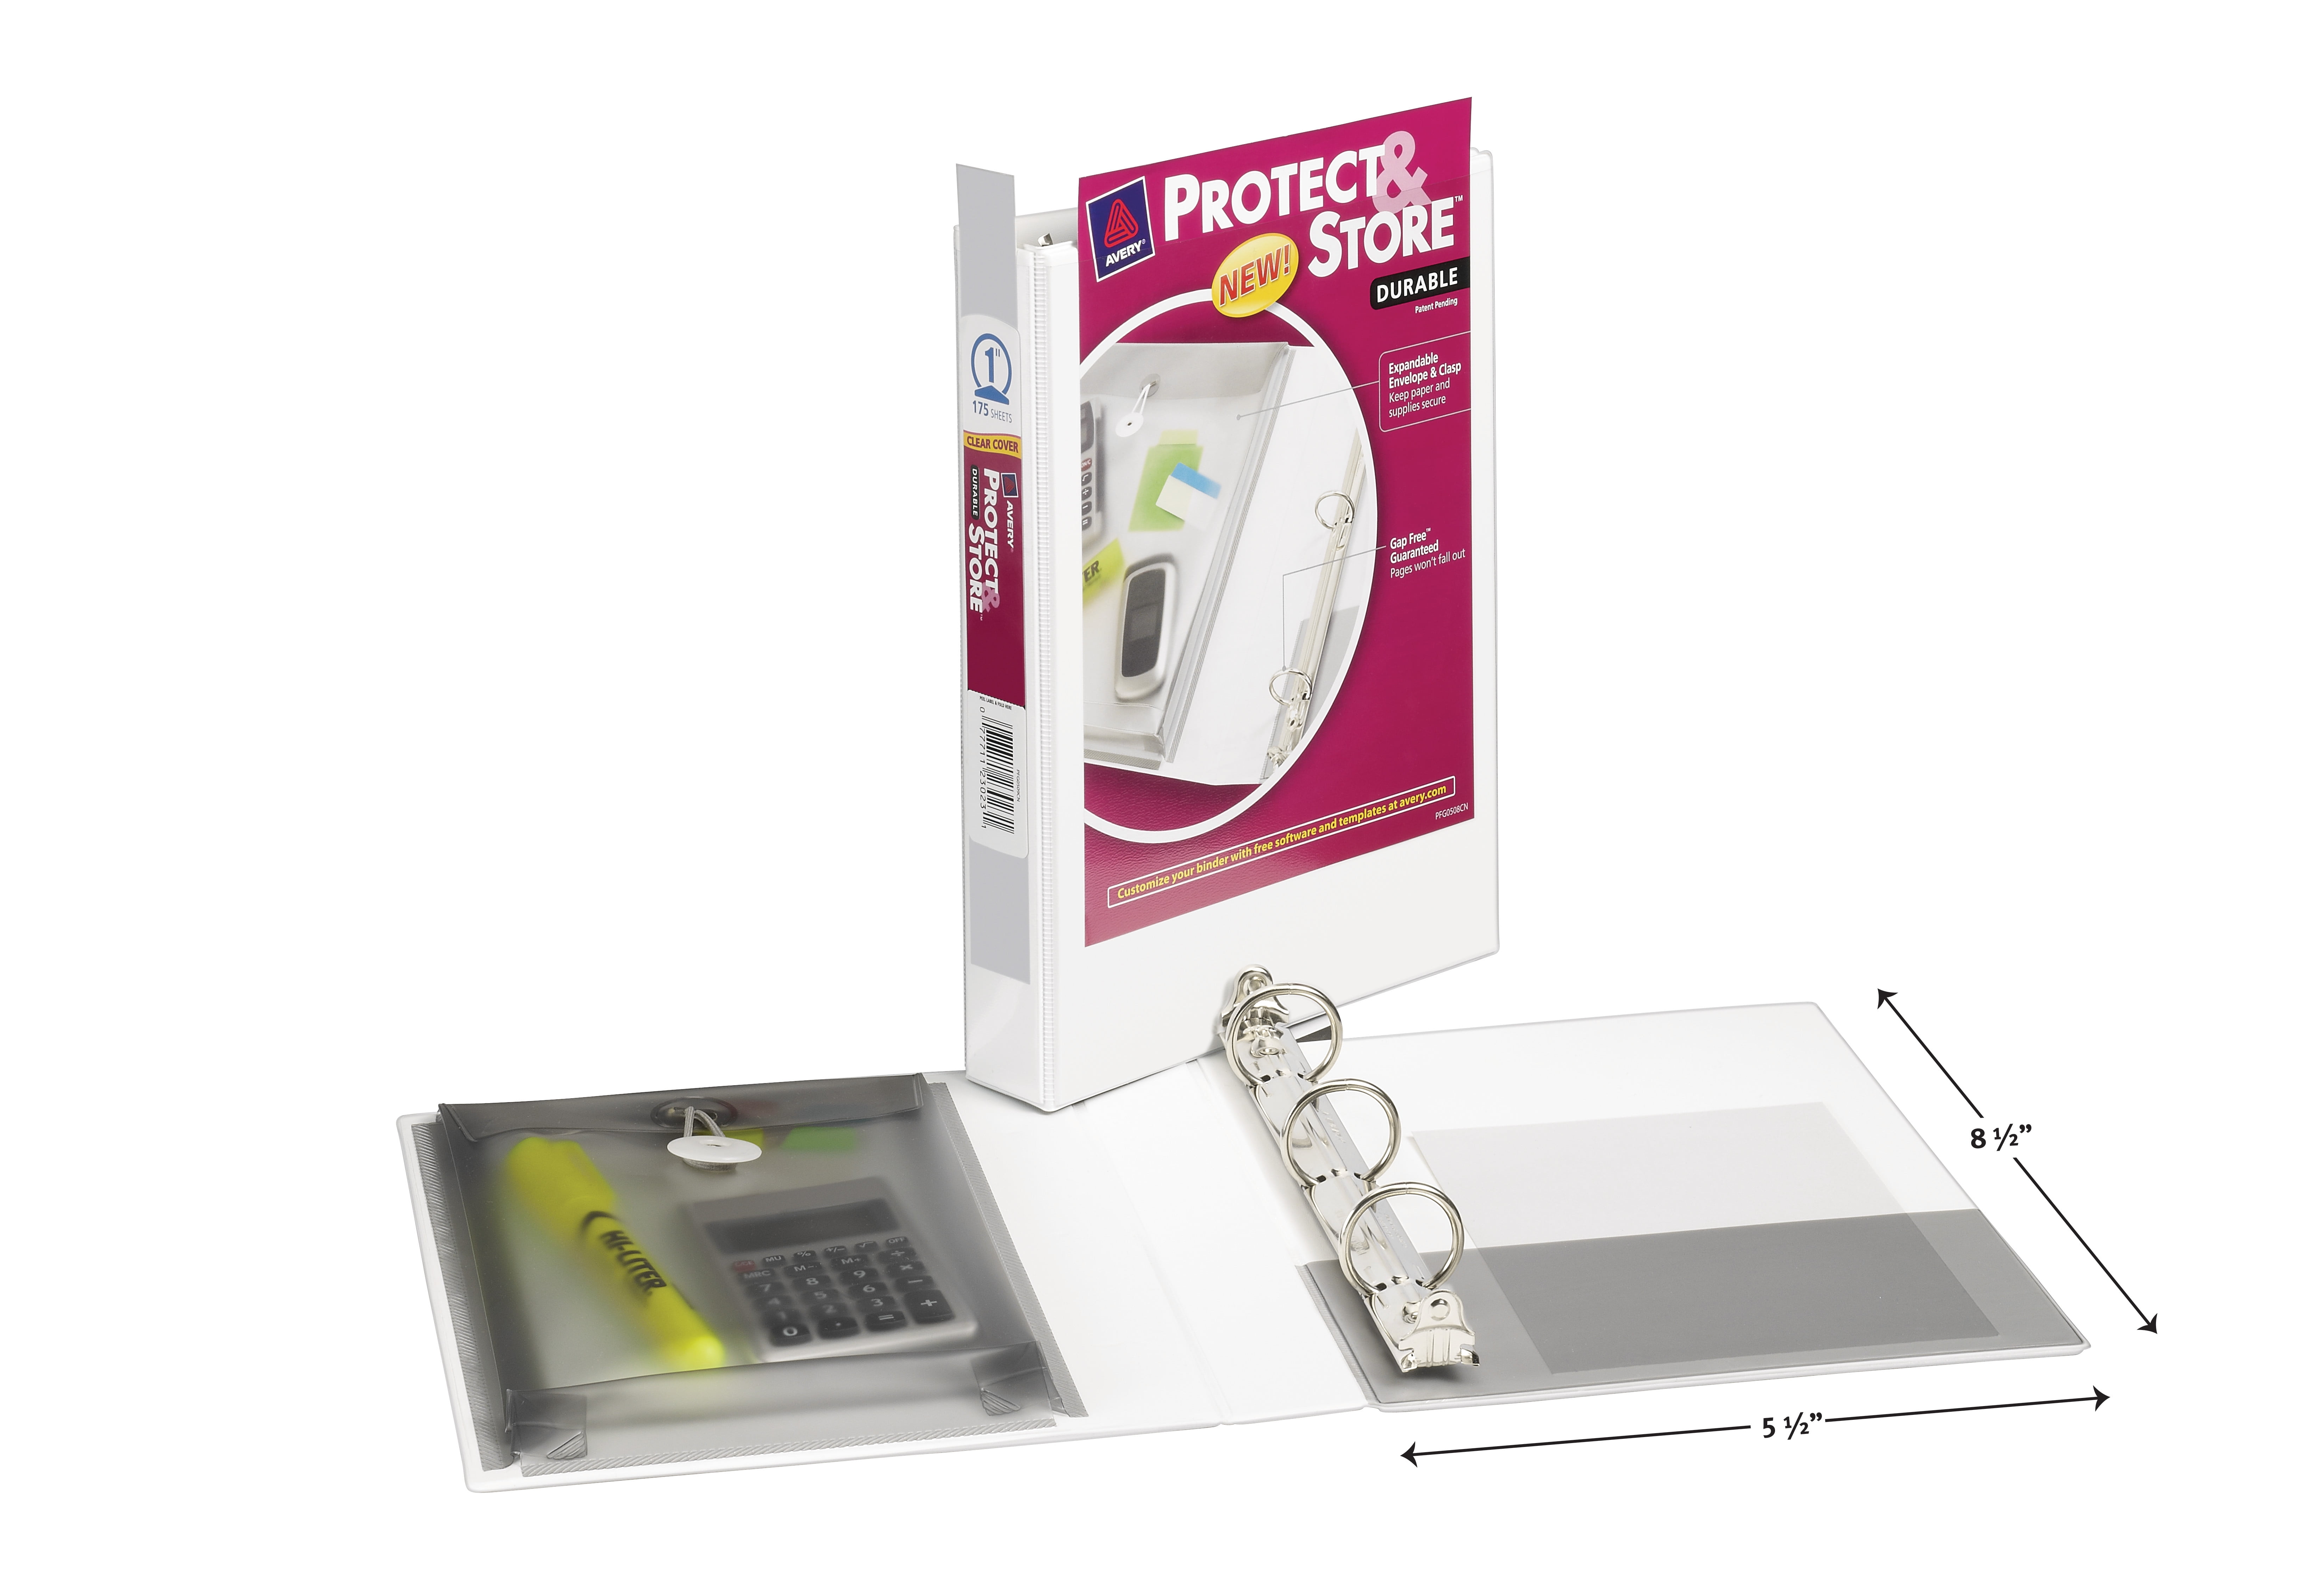 Avery® Show Off™ View Binder Multipack, 1 Round Rings, 175-Sheet Capacity,  4 Pack (12789)